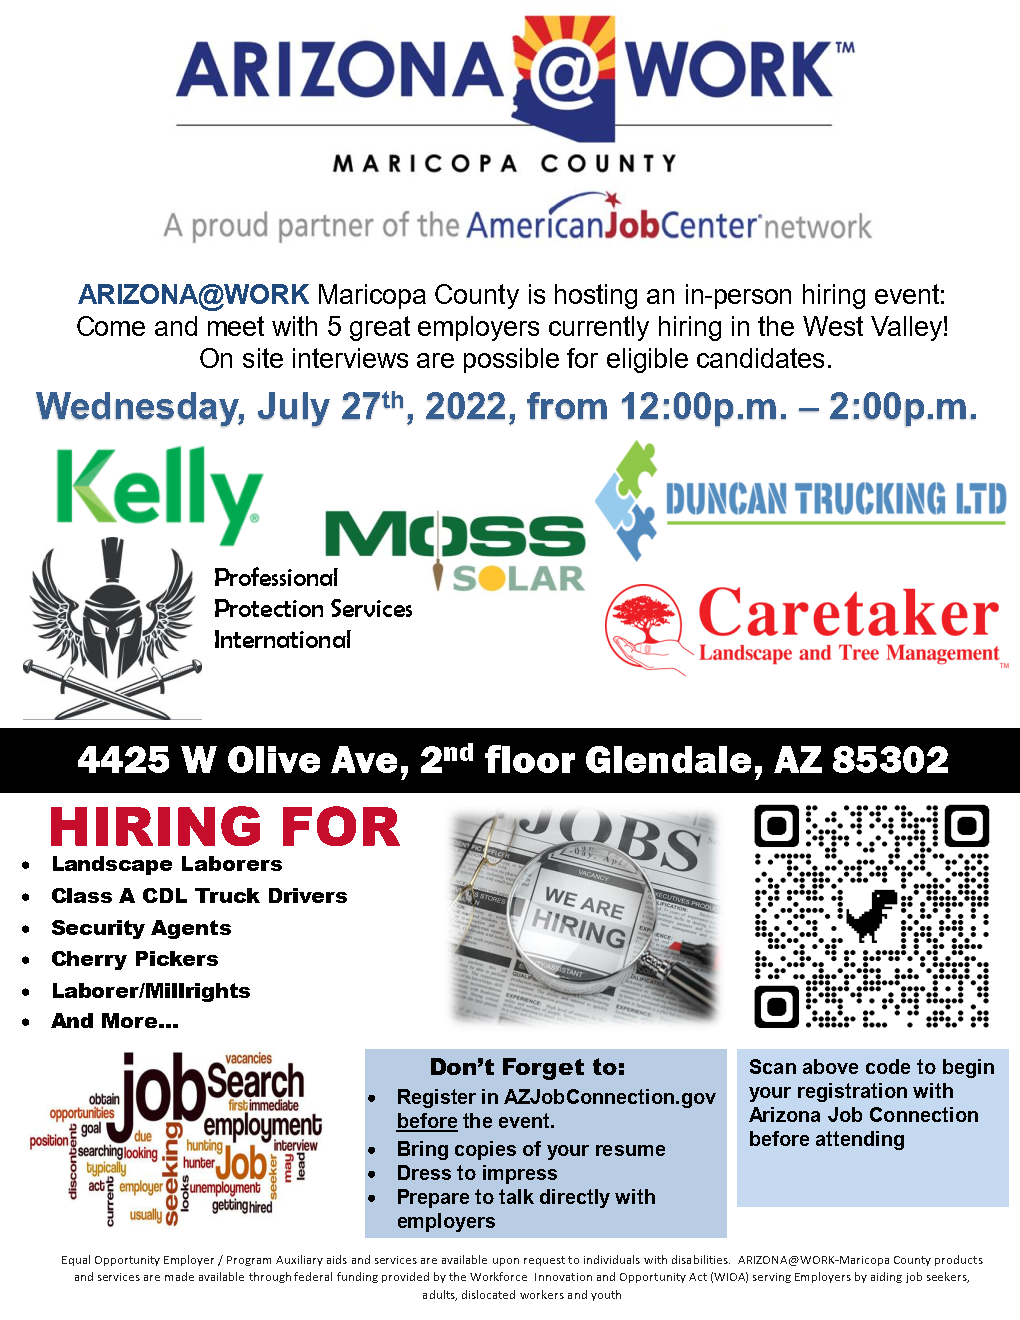 West Valley Hiring Event 07.27.2022